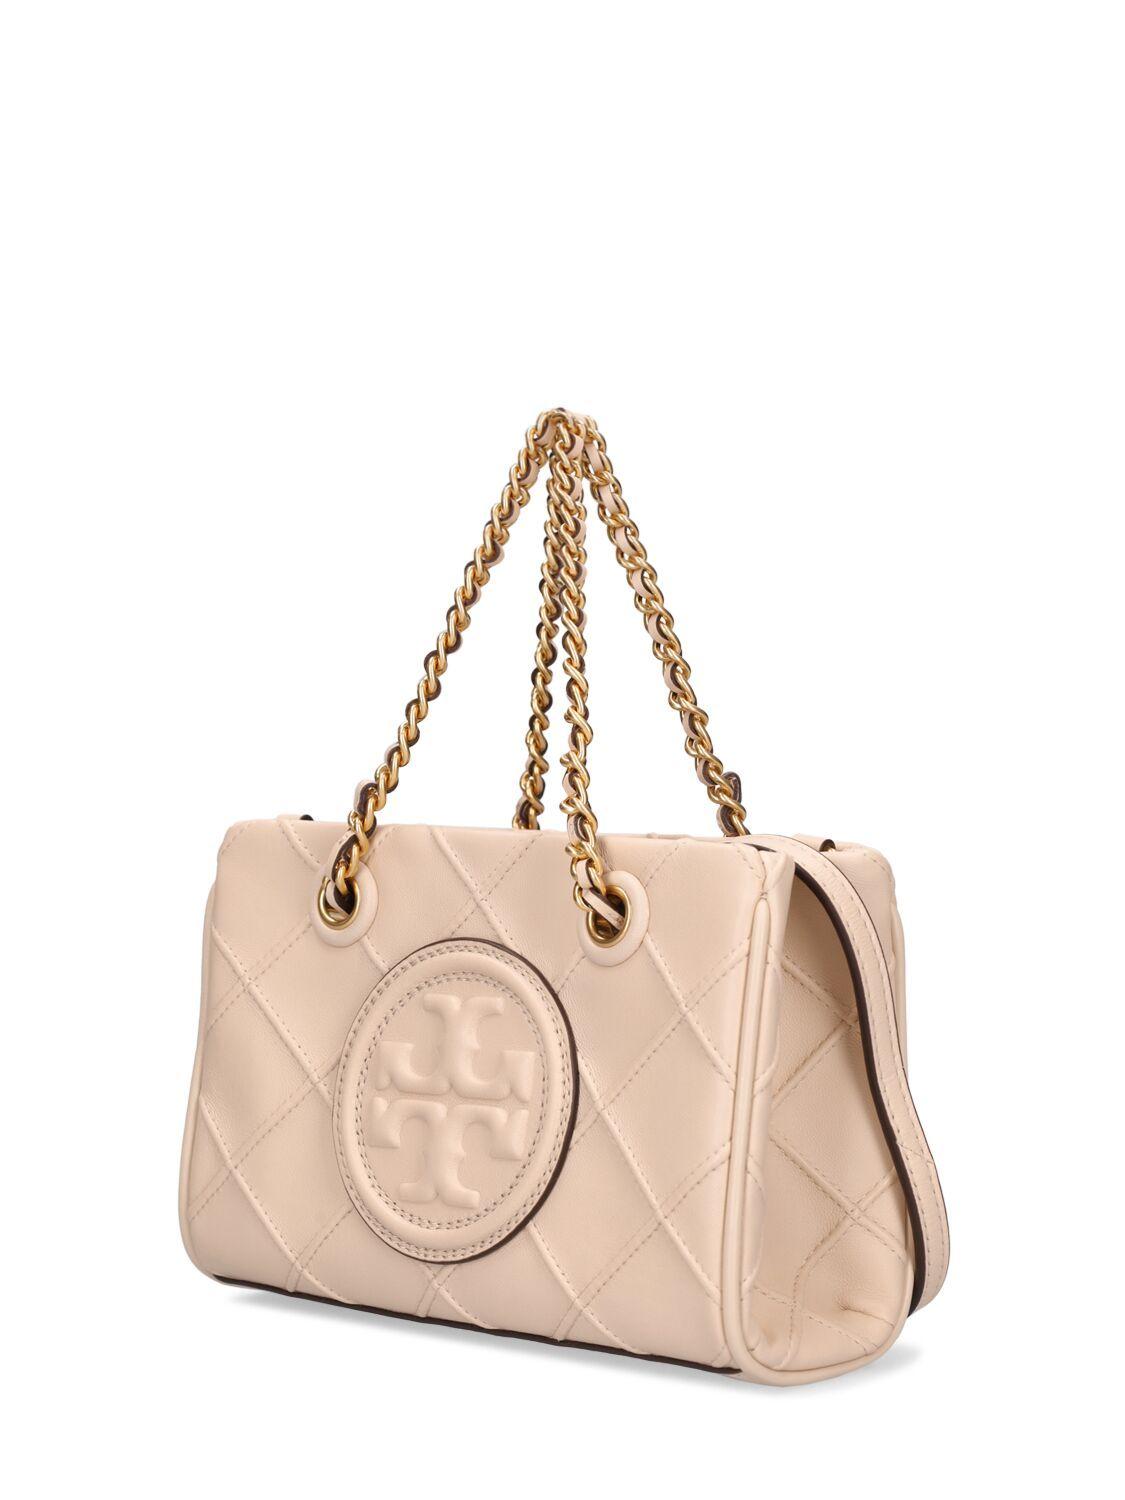 Tory Burch Mini Fleming Soft Leather Top Handle Bag in Natural